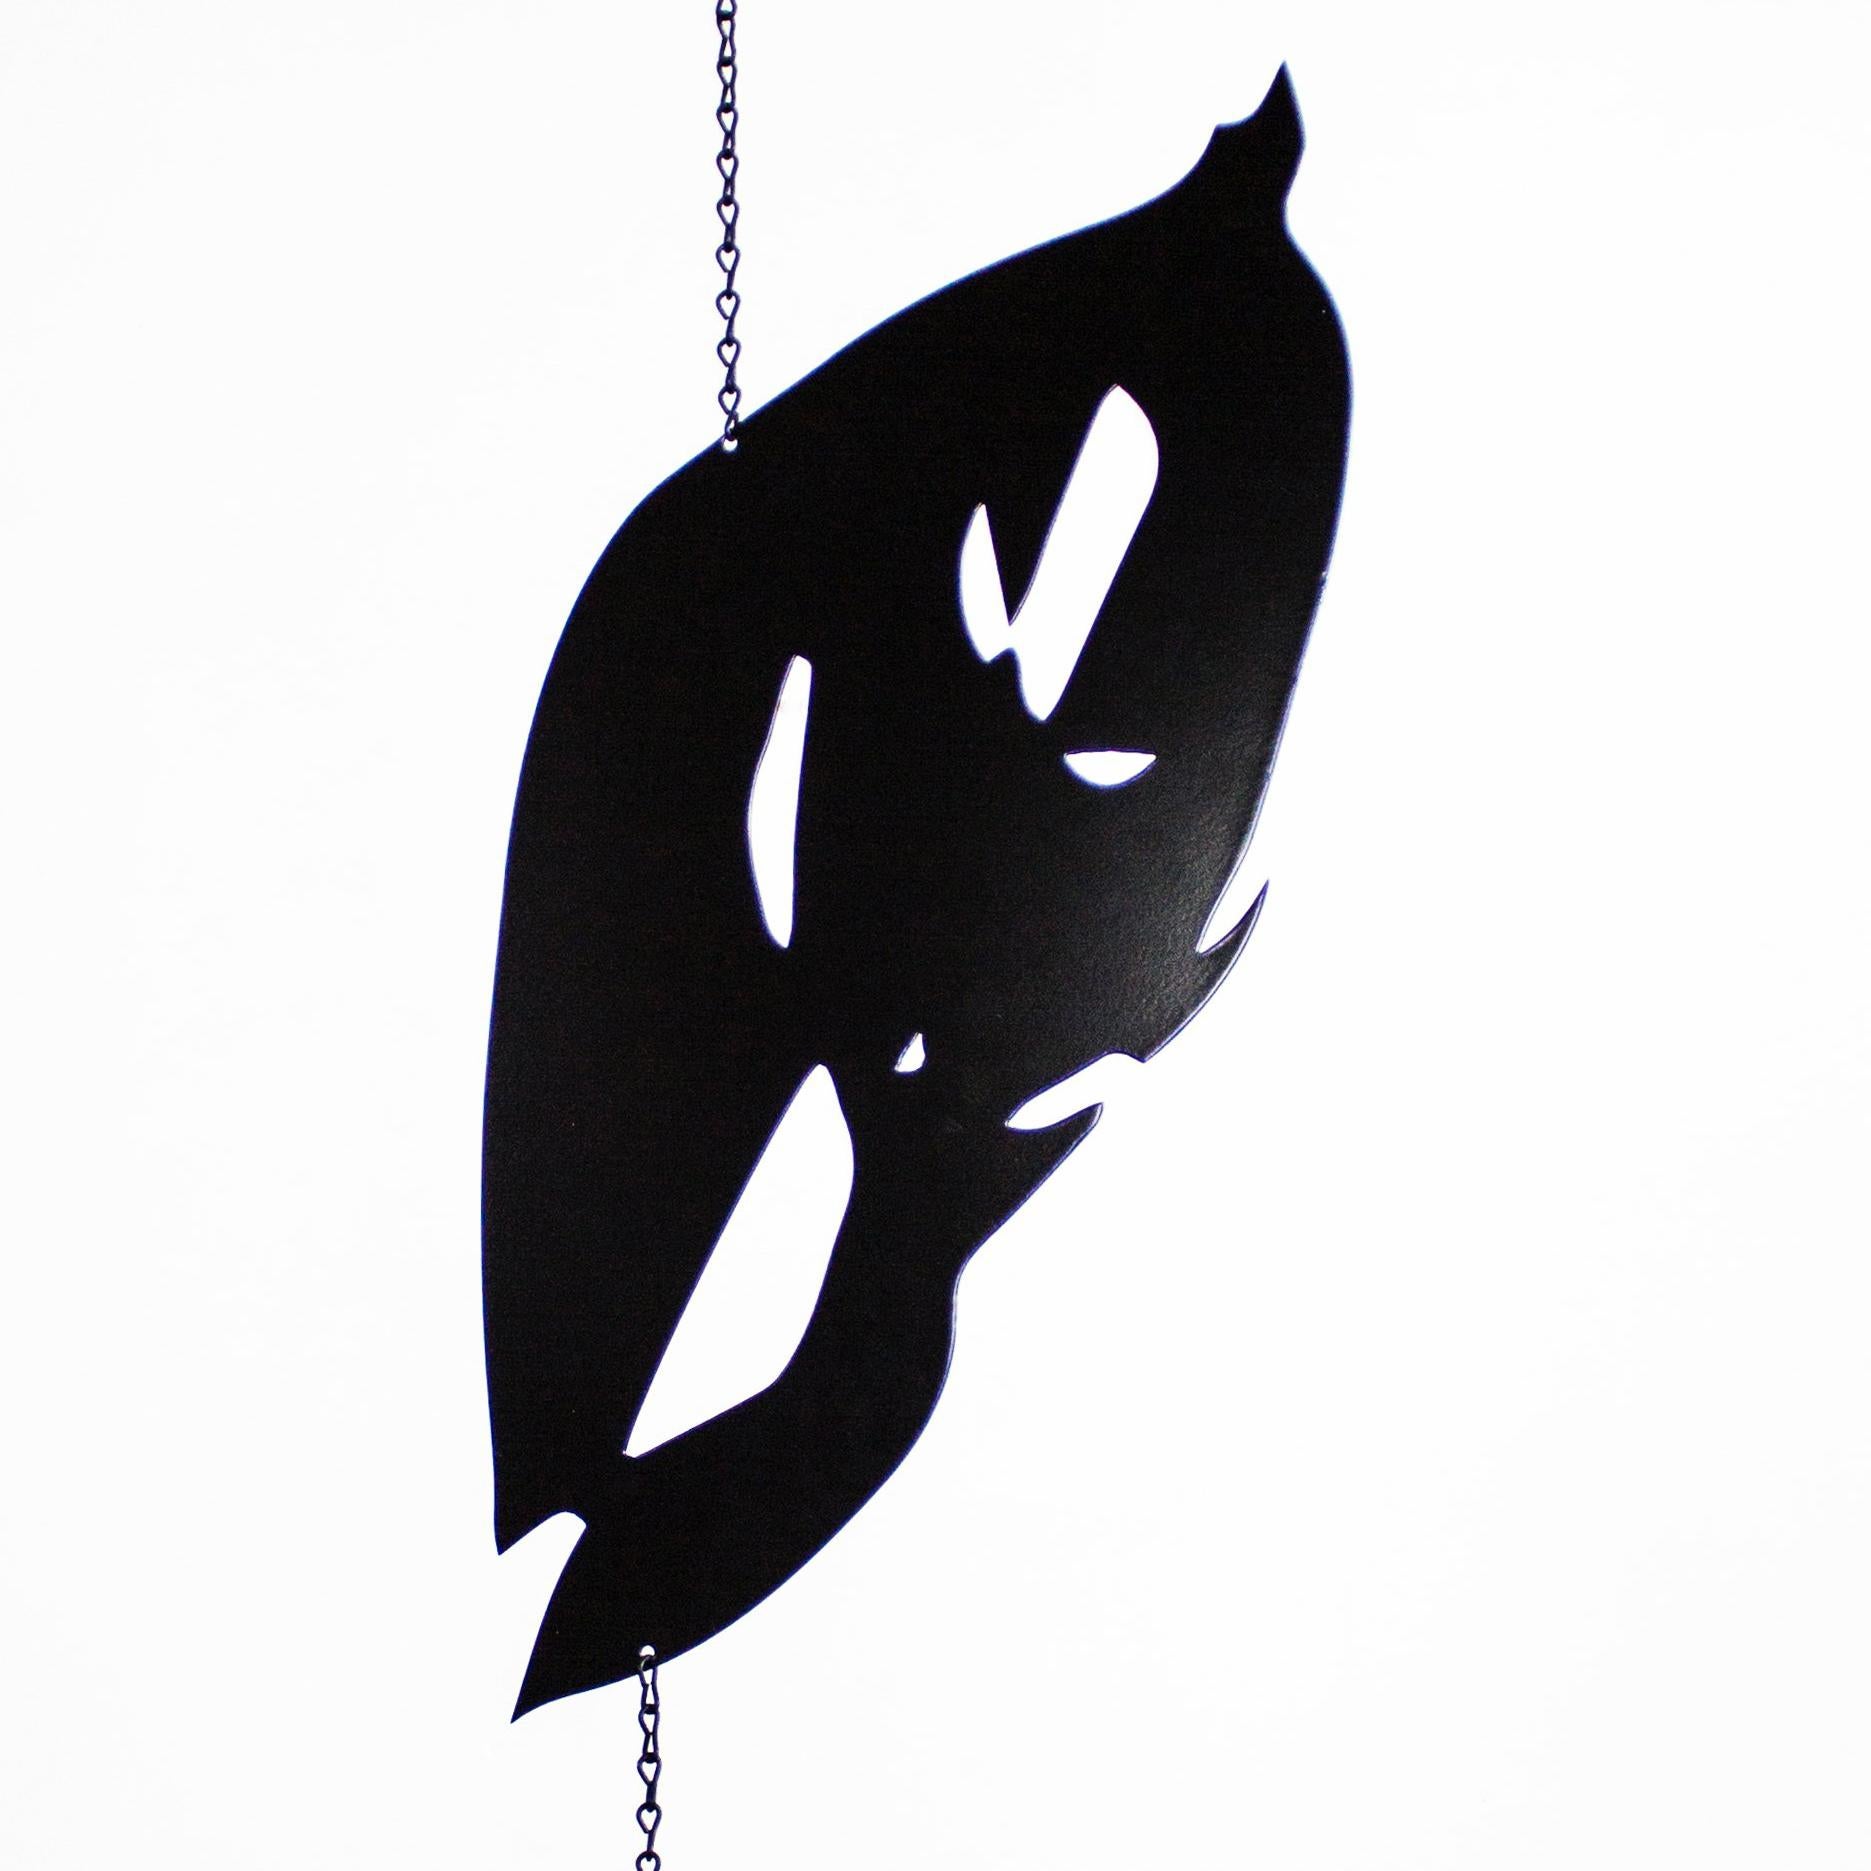 Mobile sculpture of black  leaves made up of powder coated aluminum.